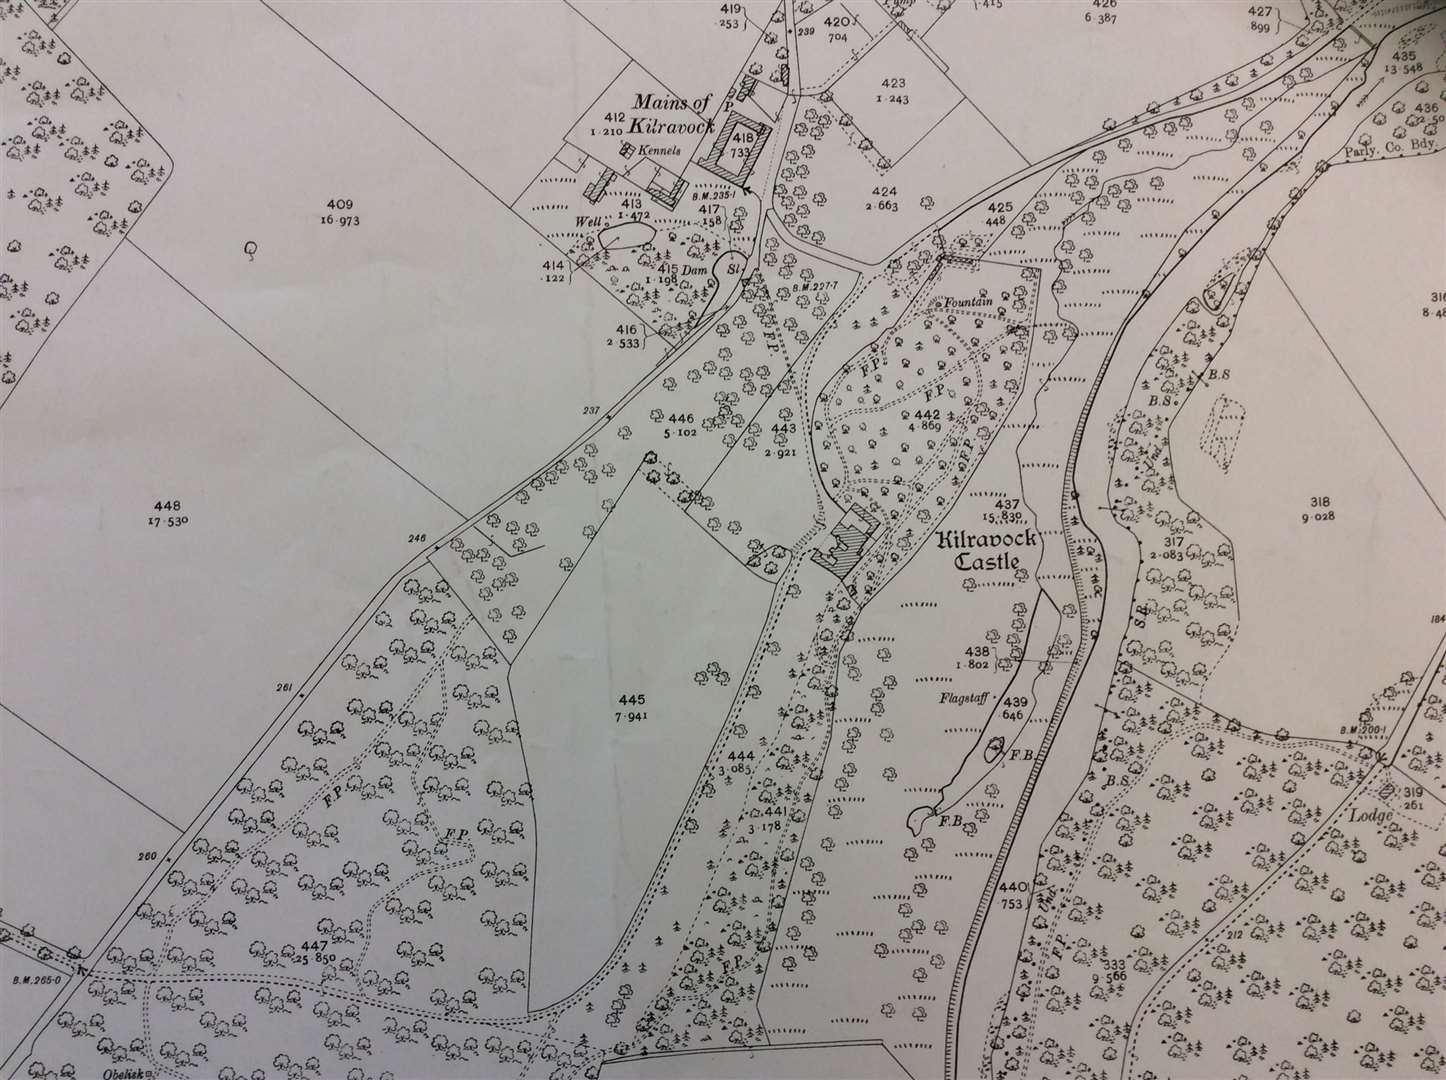 A section from the second edition Ordnance Survey map showing Kilravock Castle.